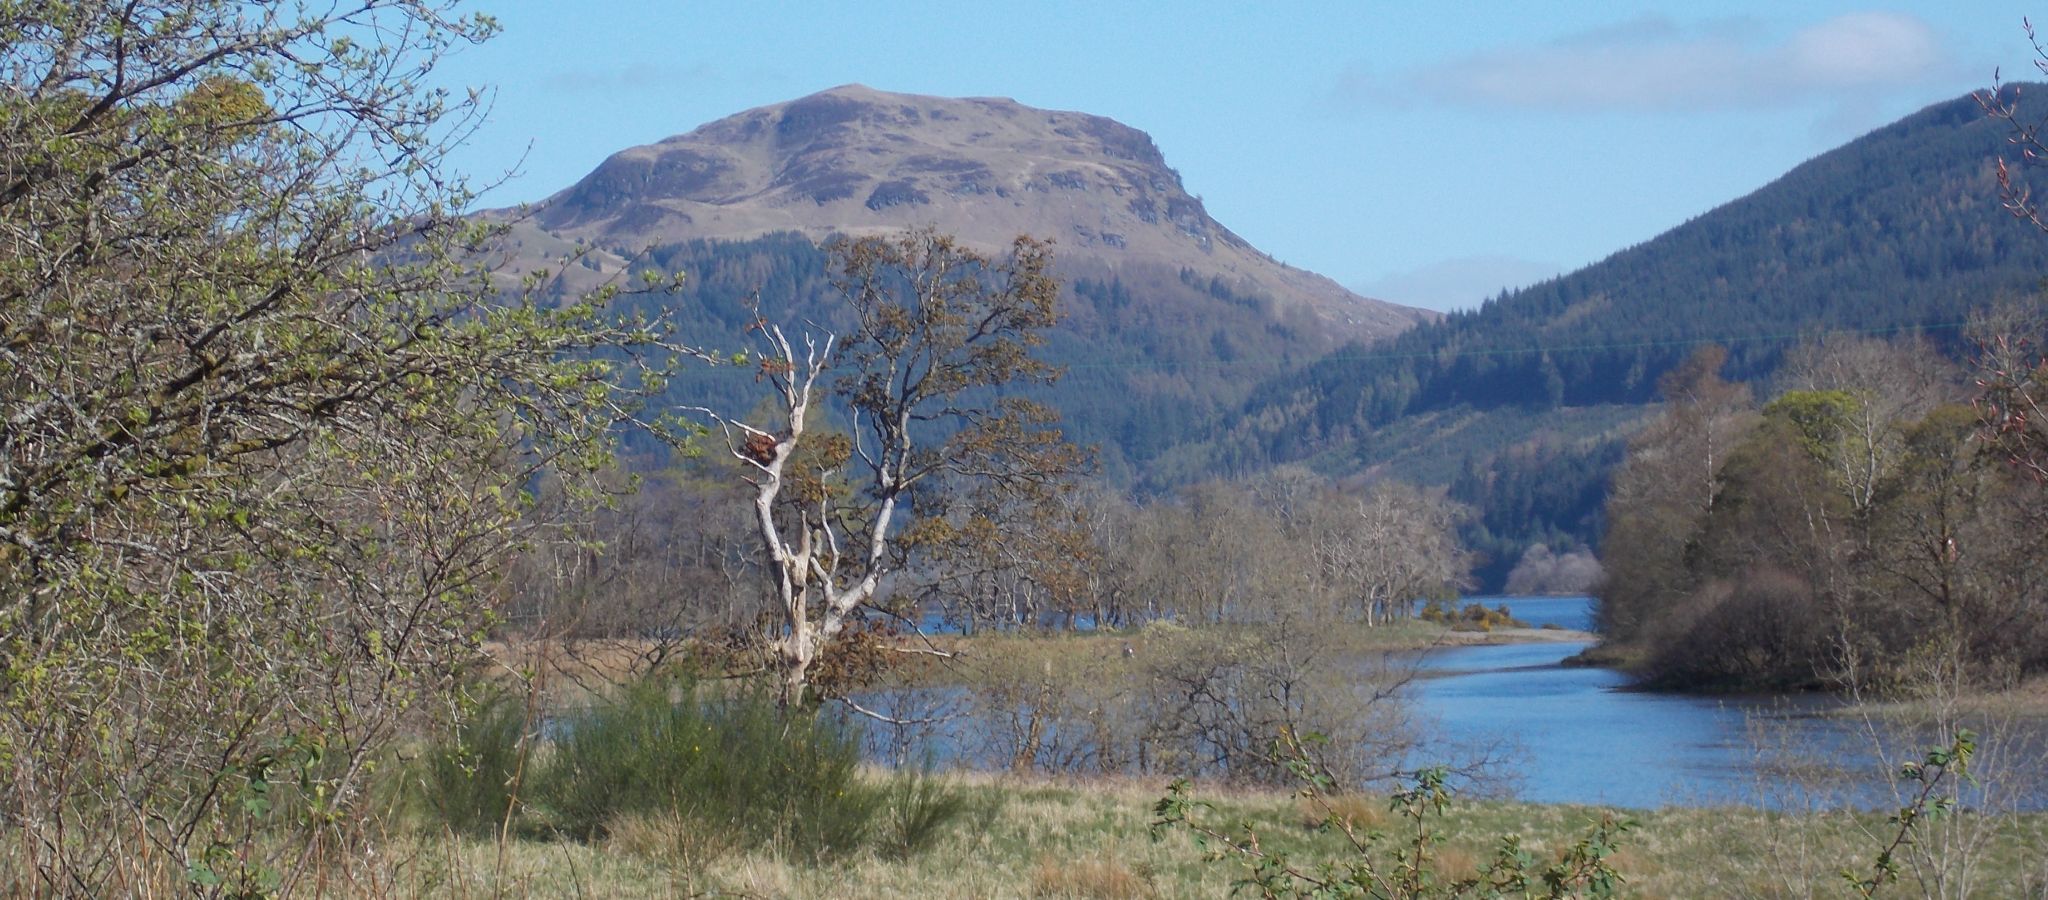 Meall Mor from the Rob Roy Way alongside Loch Lubnaig